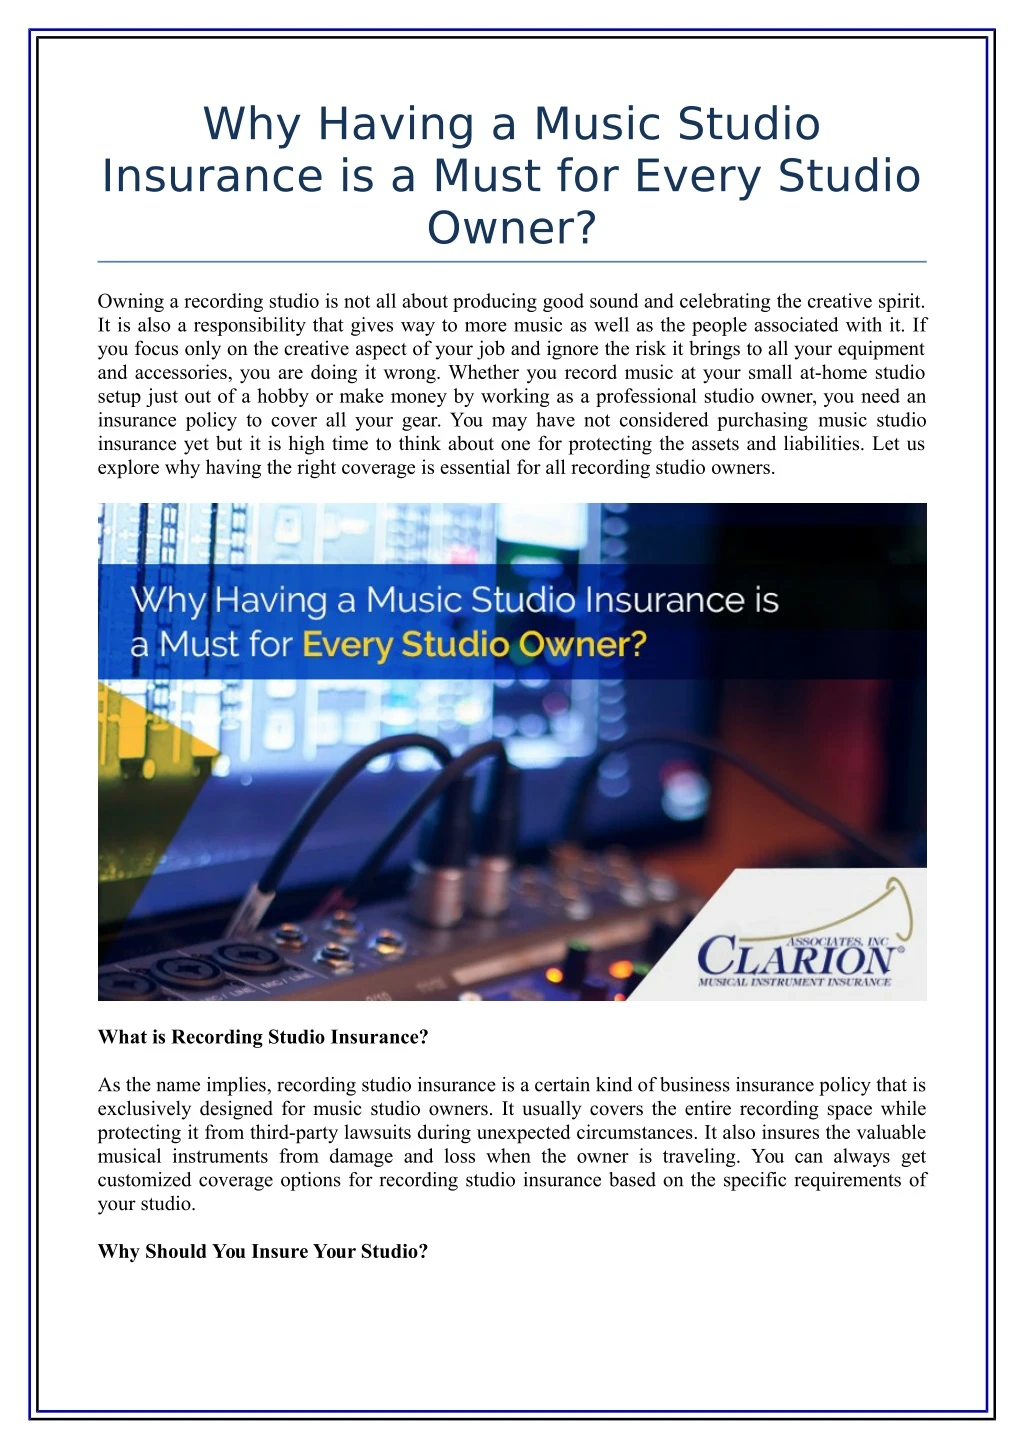 why having a music studio insurance is a must